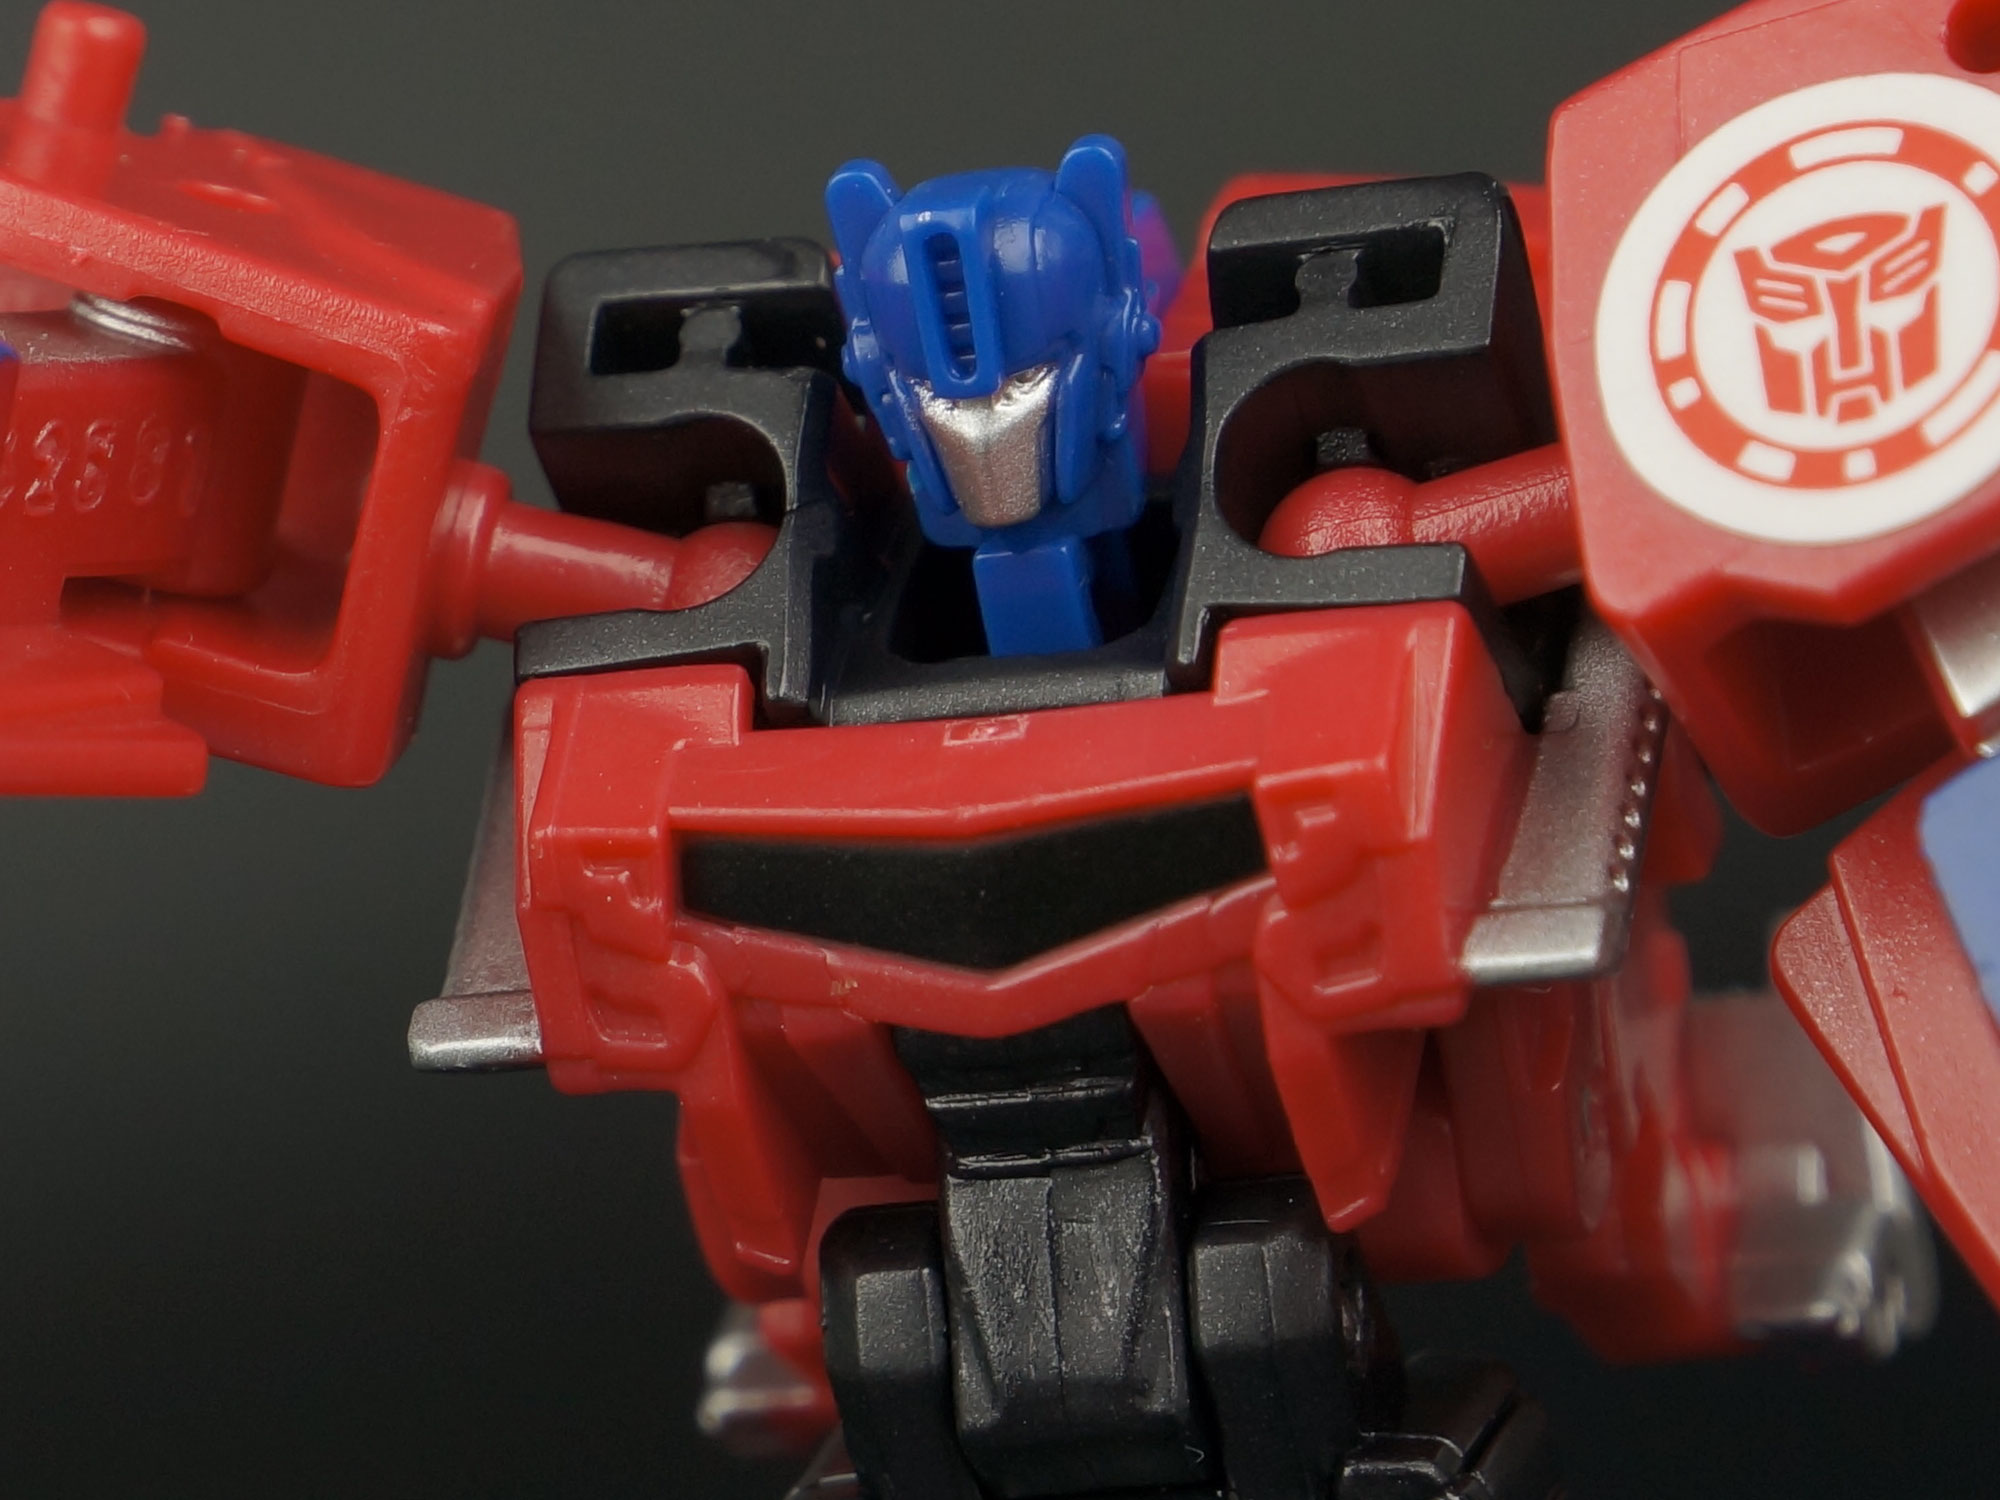 Transformers: Robots In Disguise Optimus Prime (Image #55 of 67)